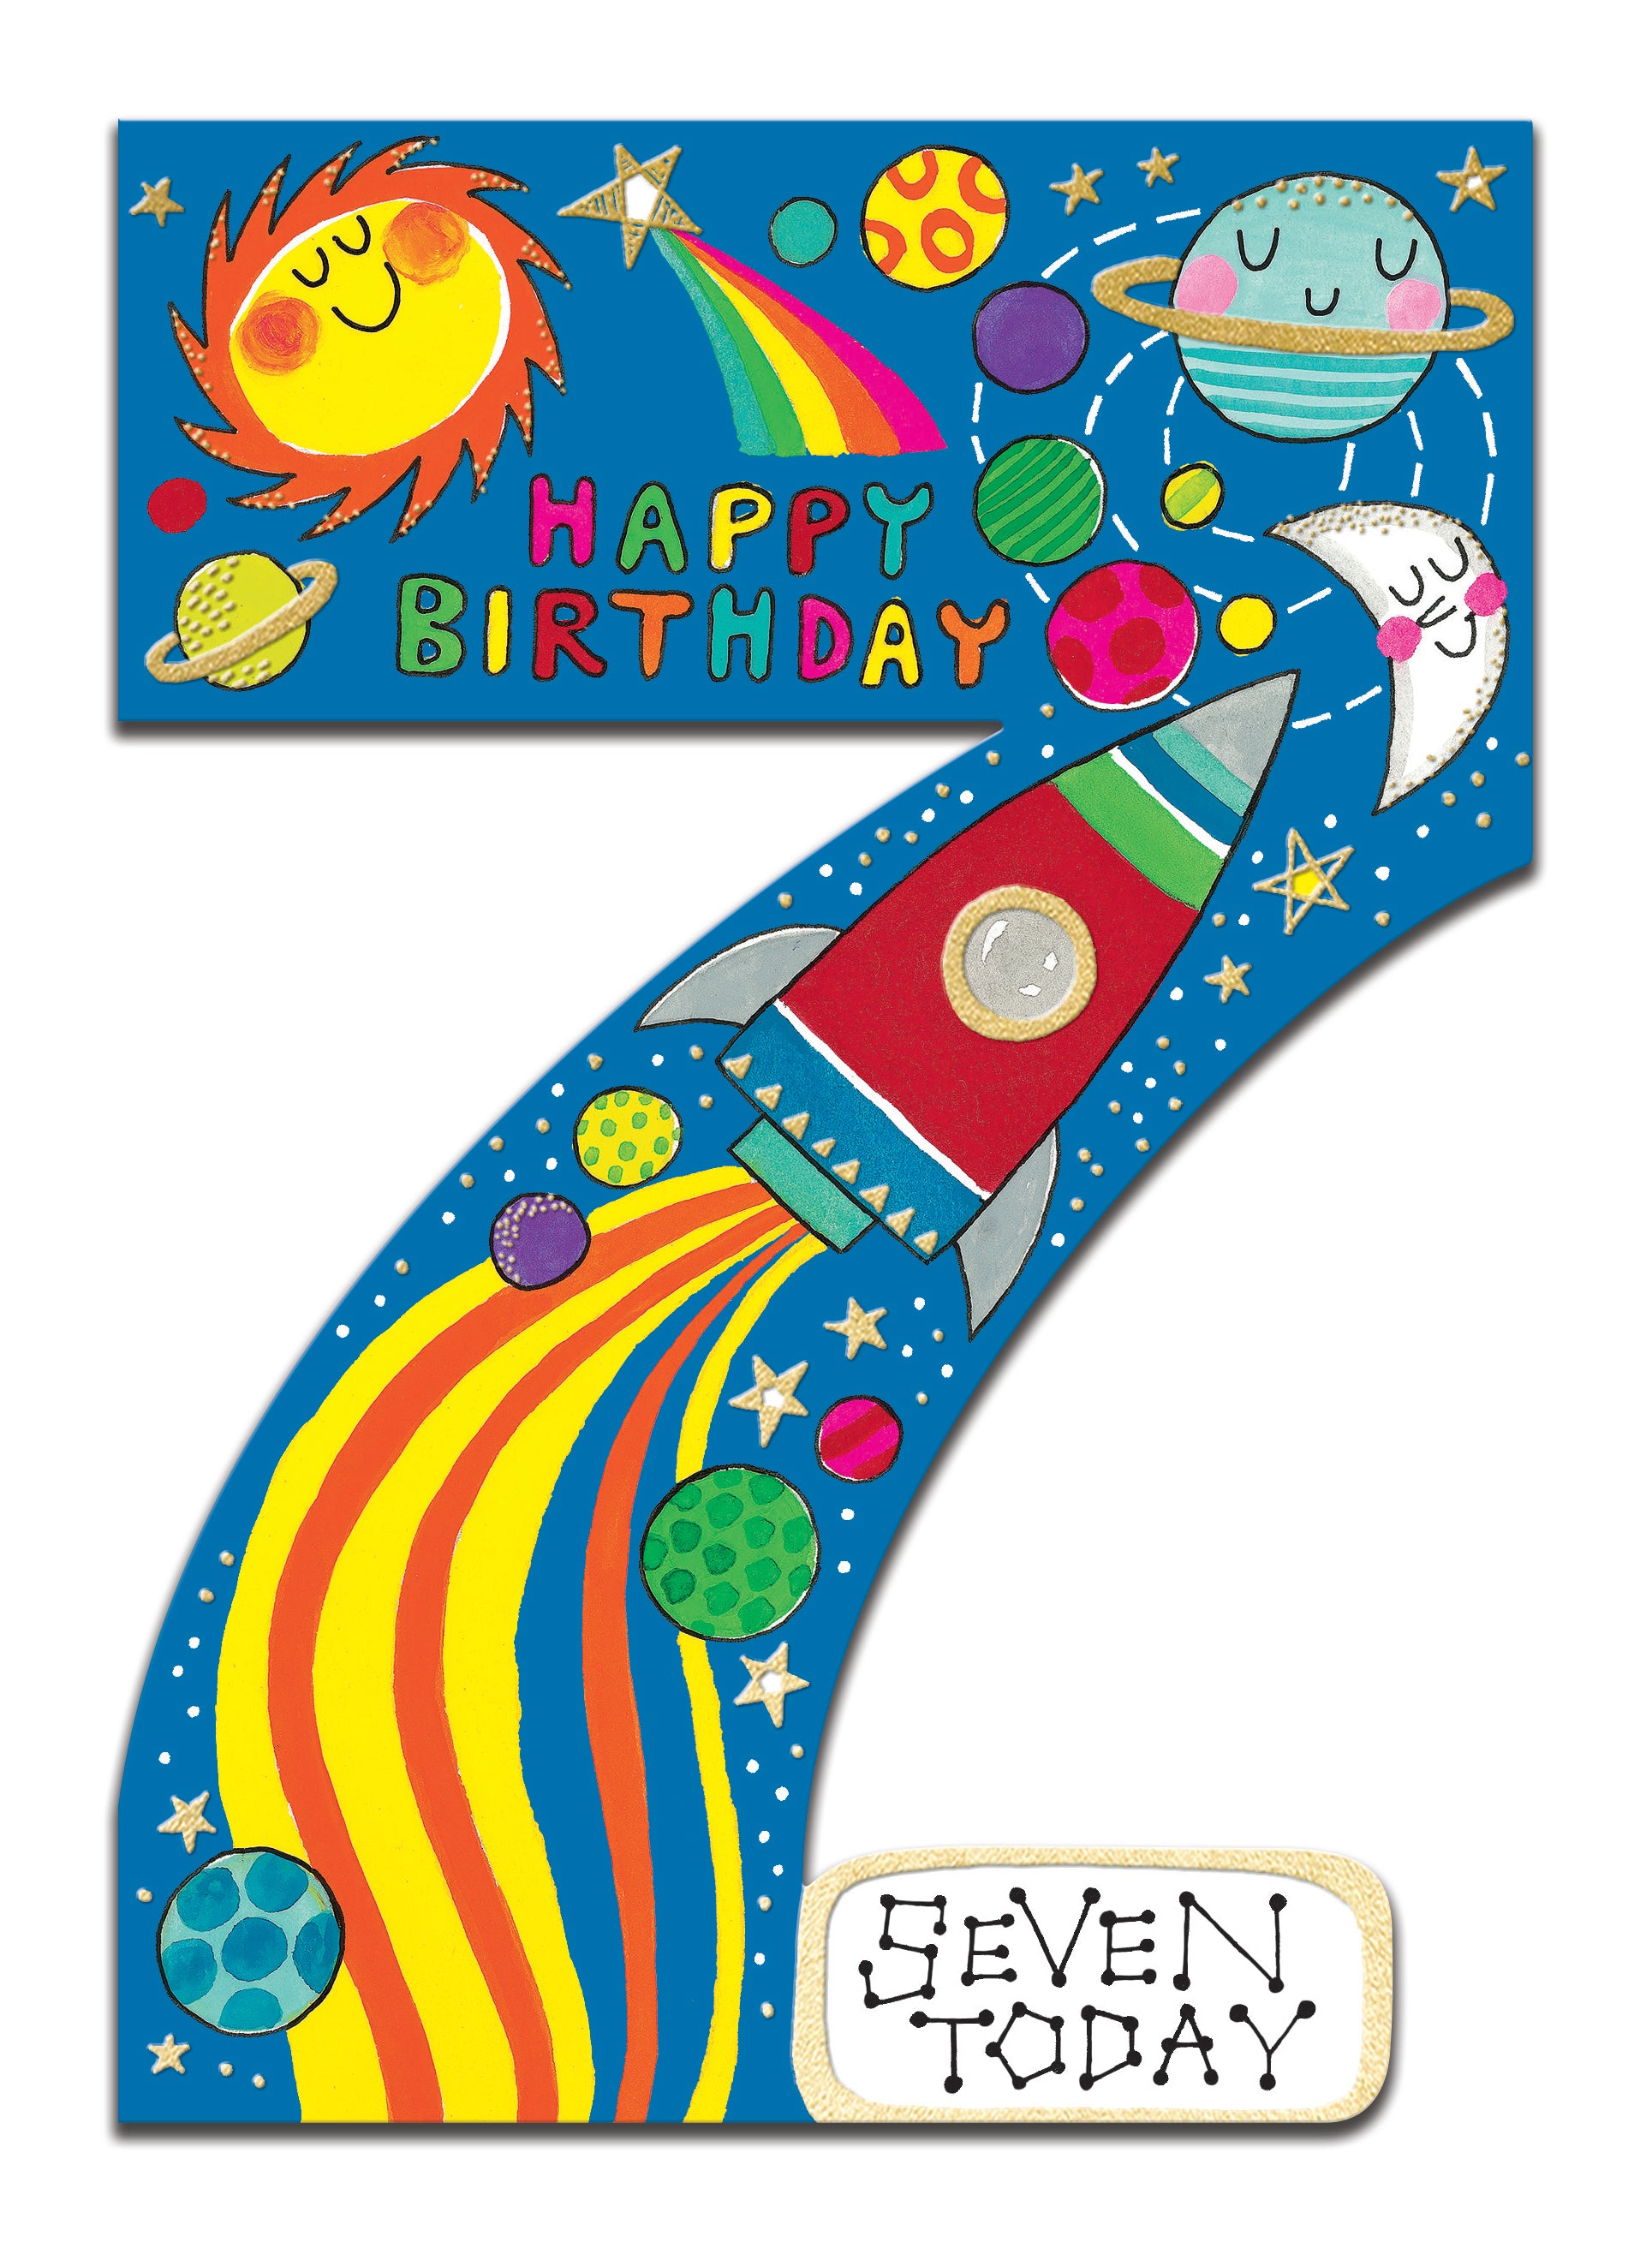 Age 7 Cosmos Cut Out Birthday Card from Penny Black